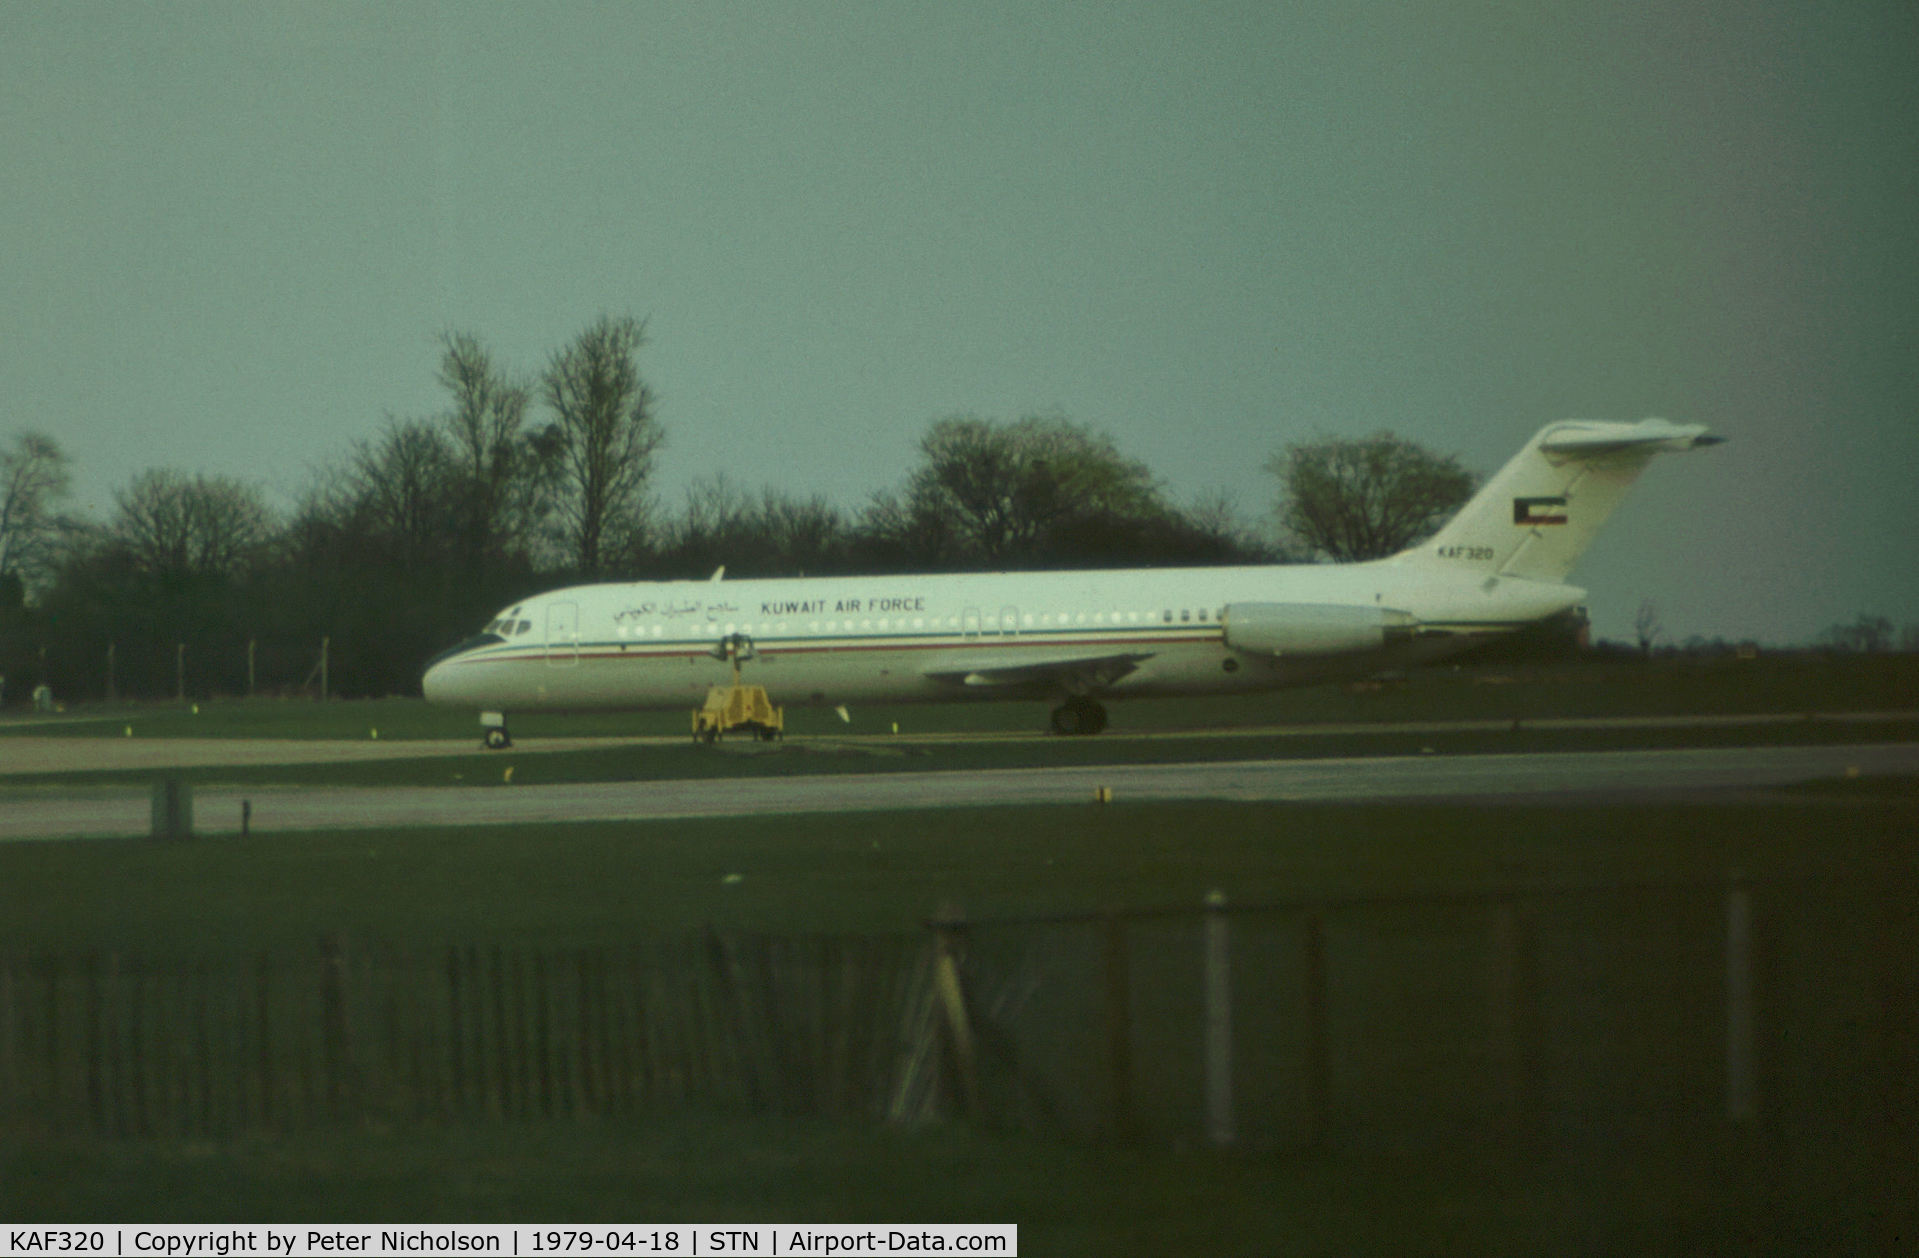 KAF320, 1976 McDonnell Douglas DC-9-32 C/N 47691, Kuwait Air Force DC-9-32 as seen at Stansted in April 1979.